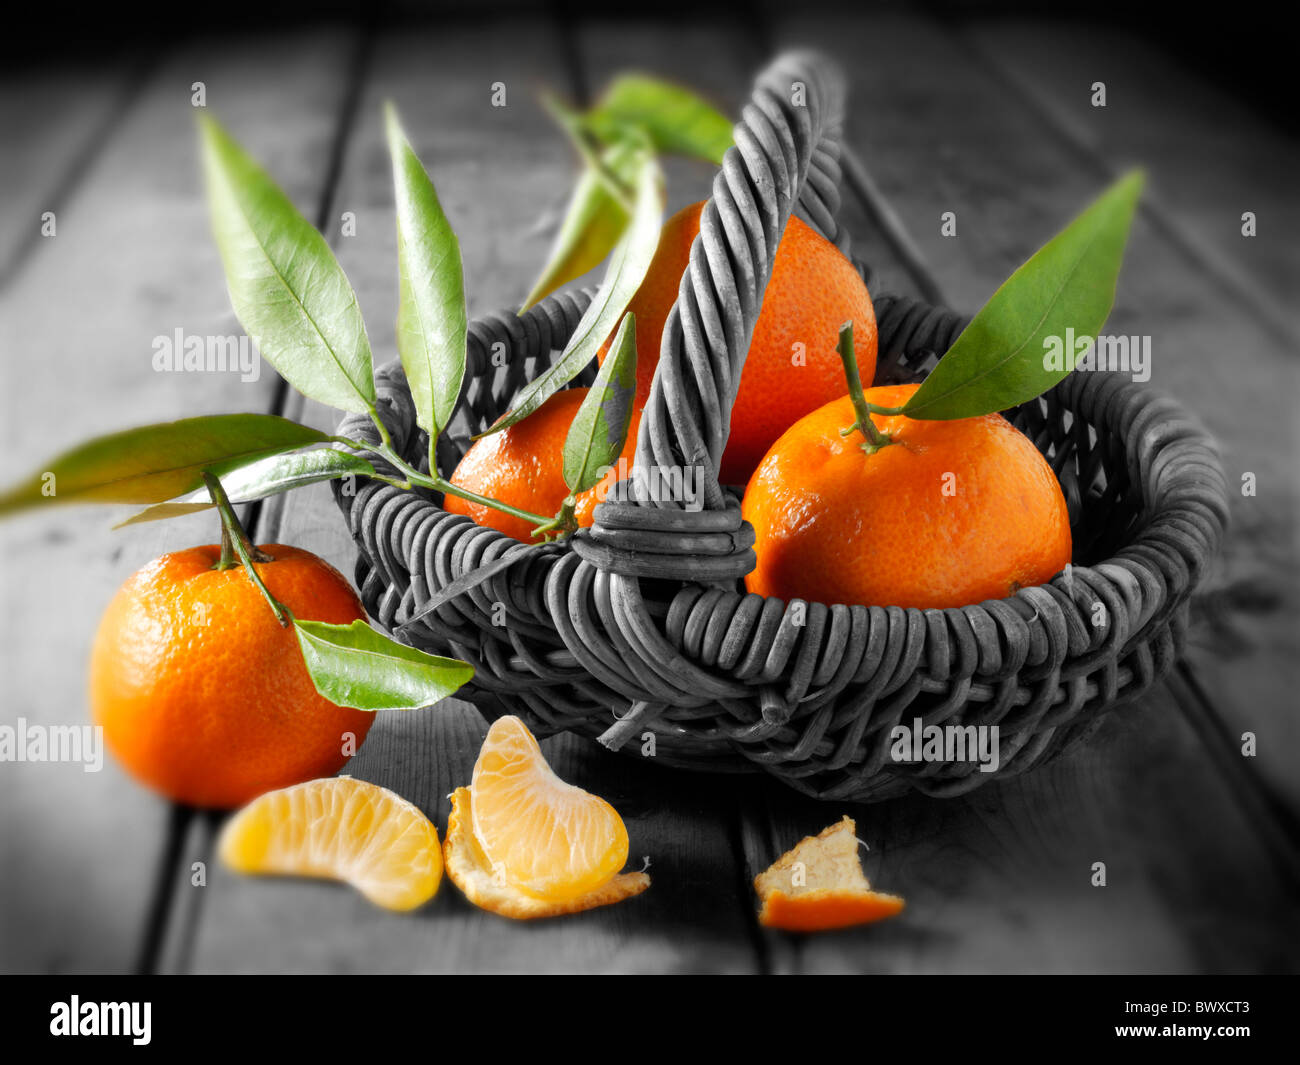 Online orders and shipping fast Fresh ripe mandarin oranges (clementine,  tangerine) with green leaves on retail market display, close up, high angle  view Stock Photo - Alamy, mandarin oranges fresh